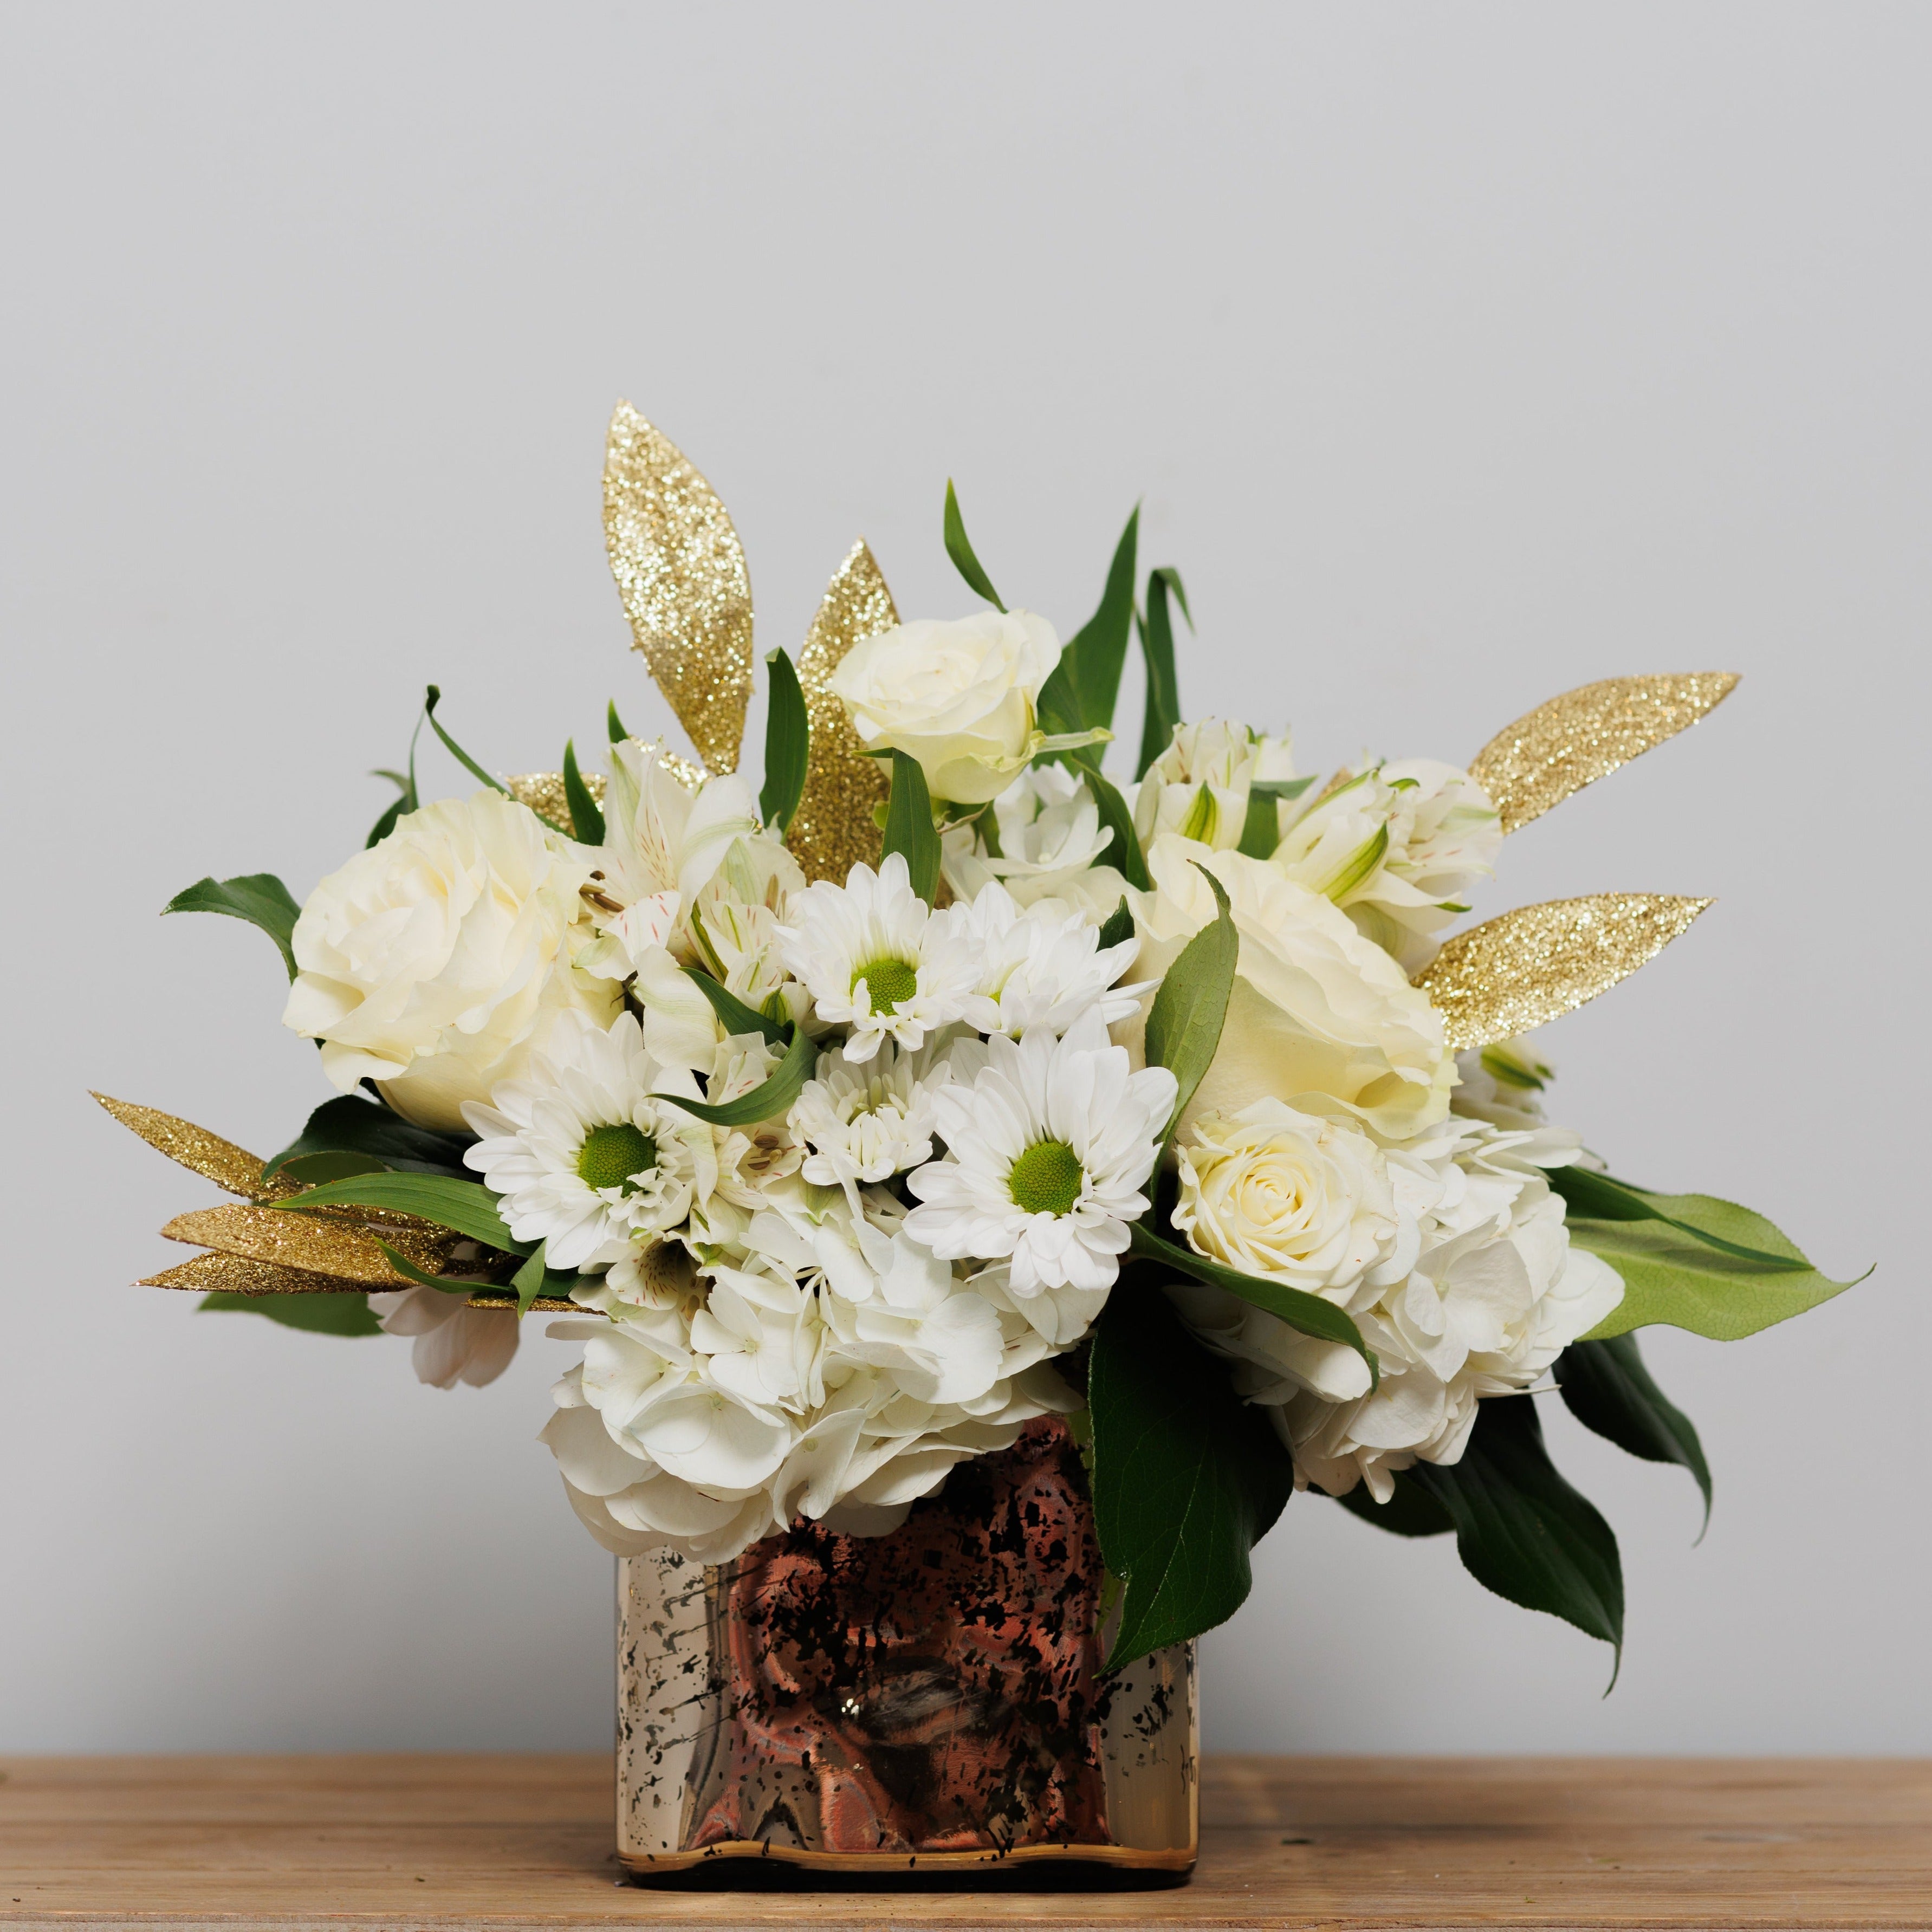 All white flowers with golden accents in a cube arrangement.